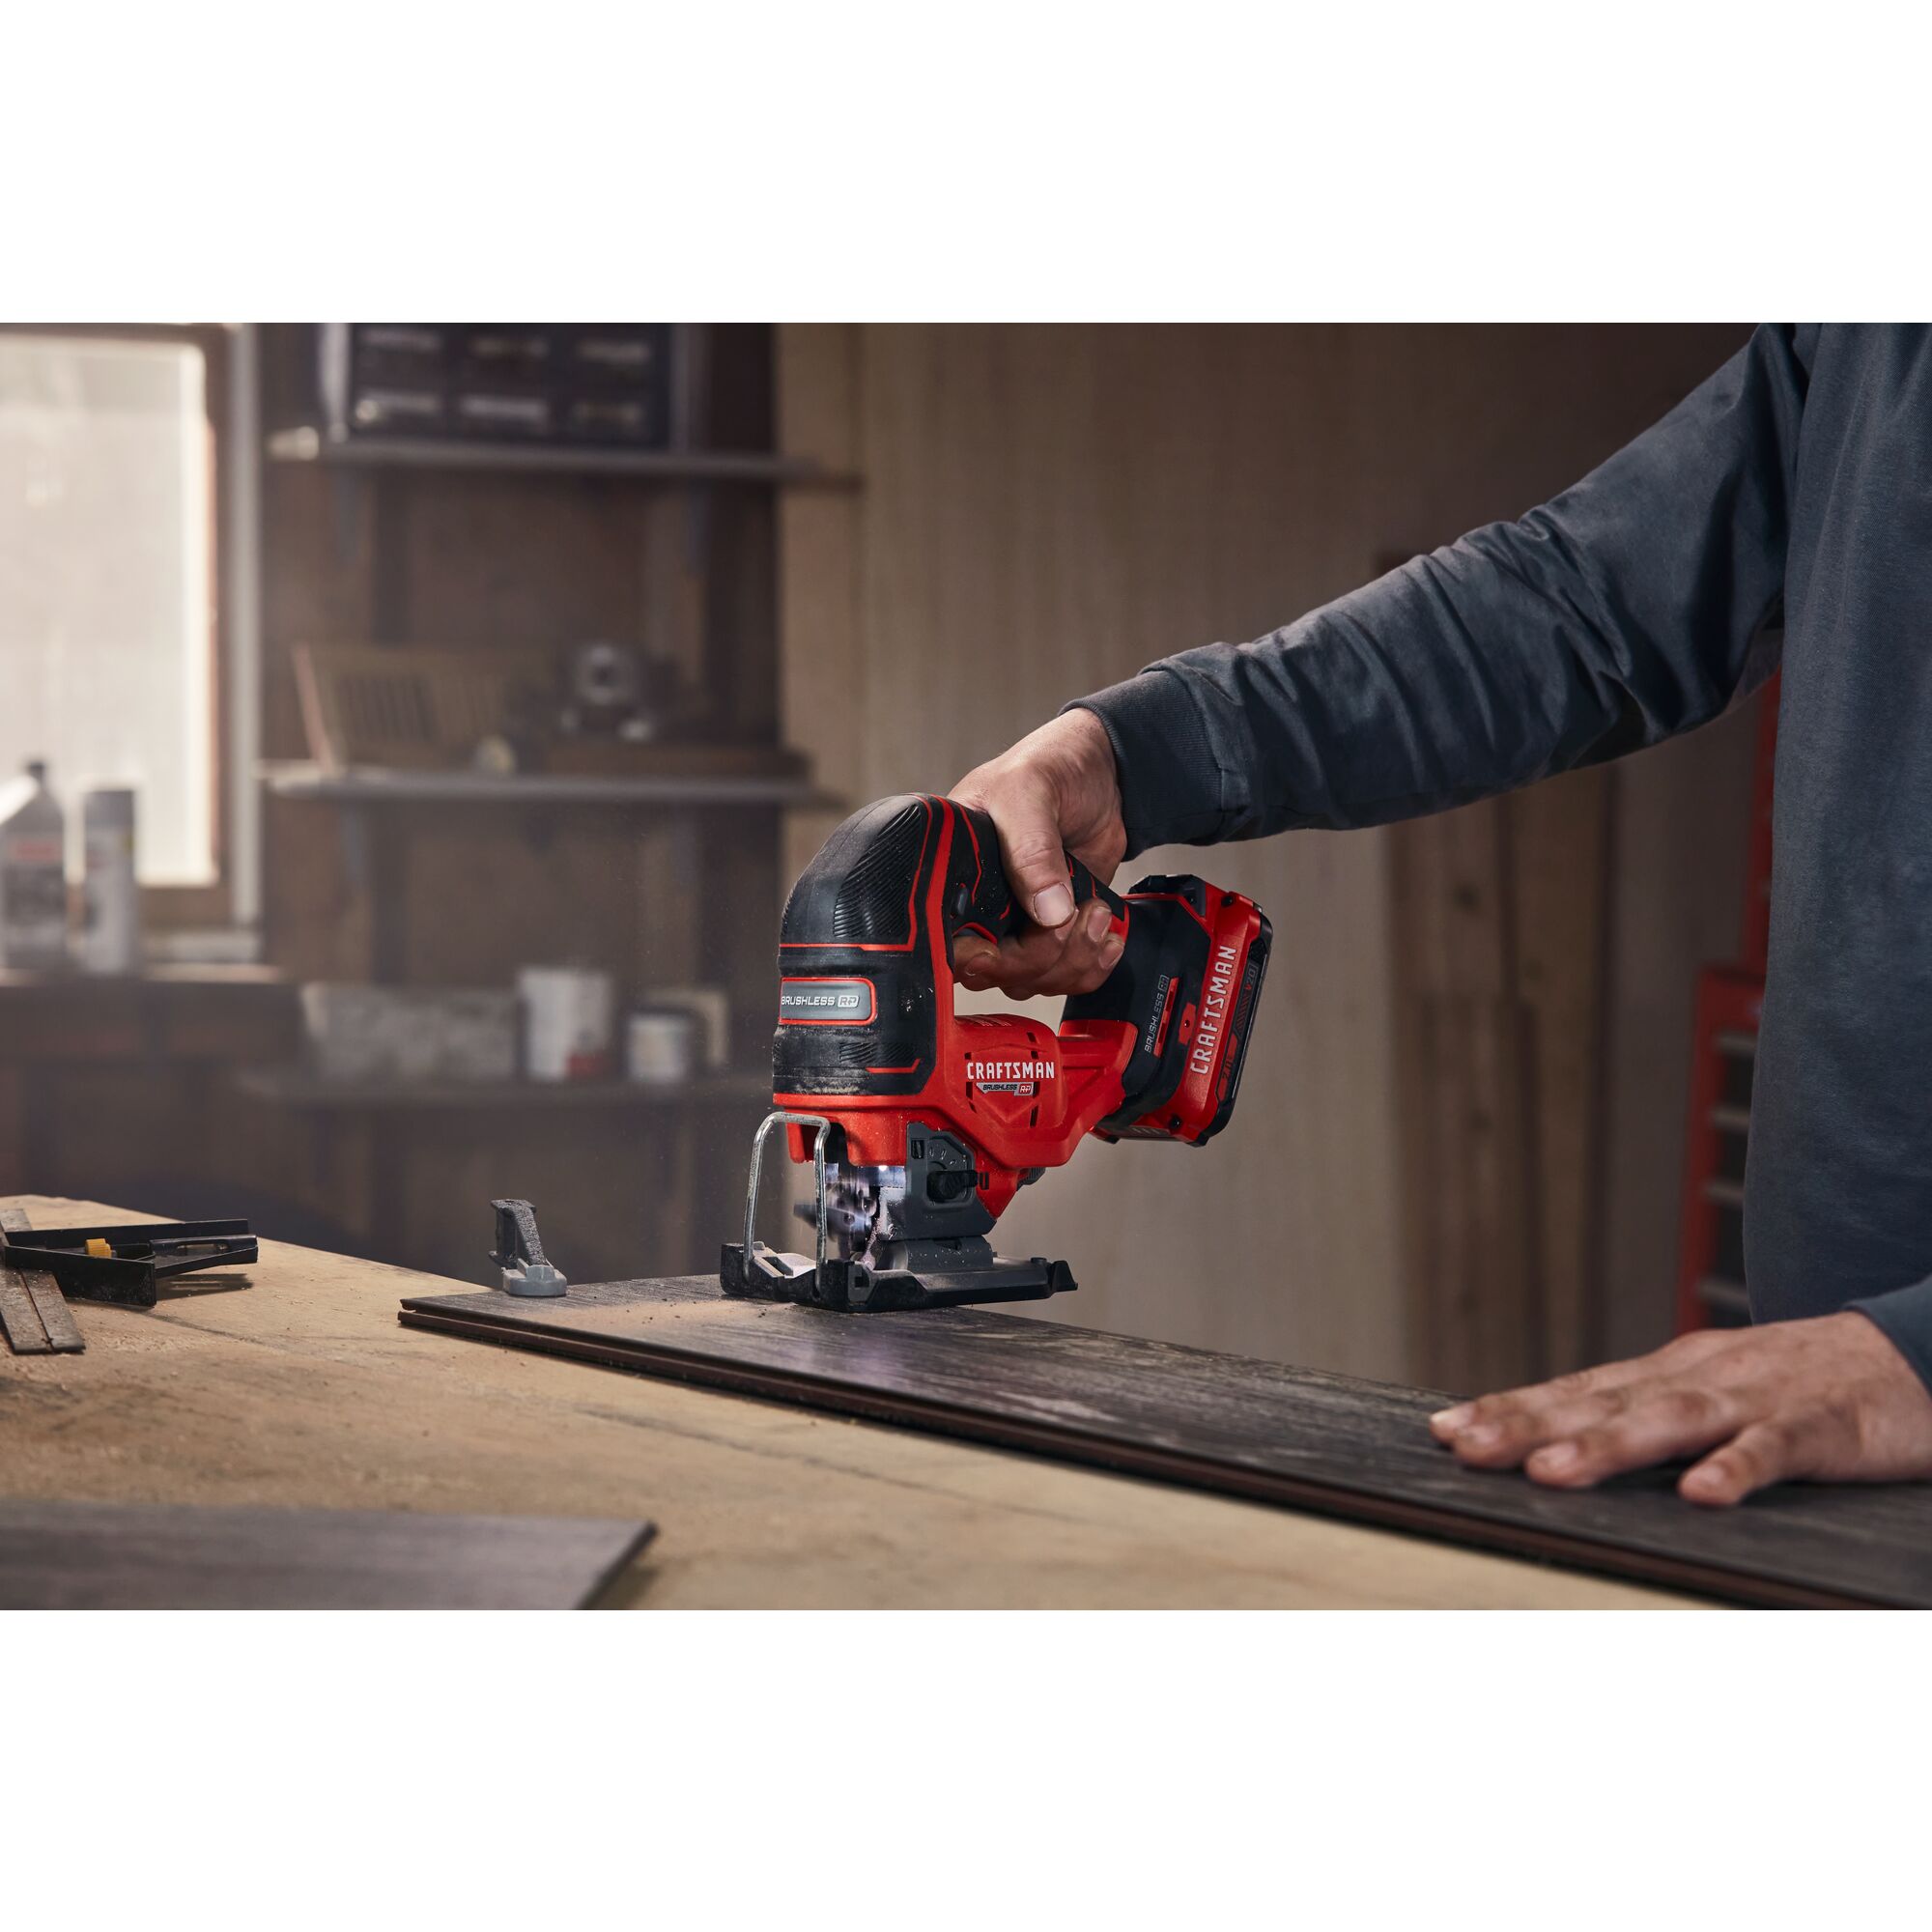 CRAFTSMAN V20 BRUSHLESS RP Jigsaw in use - battery sold separately 